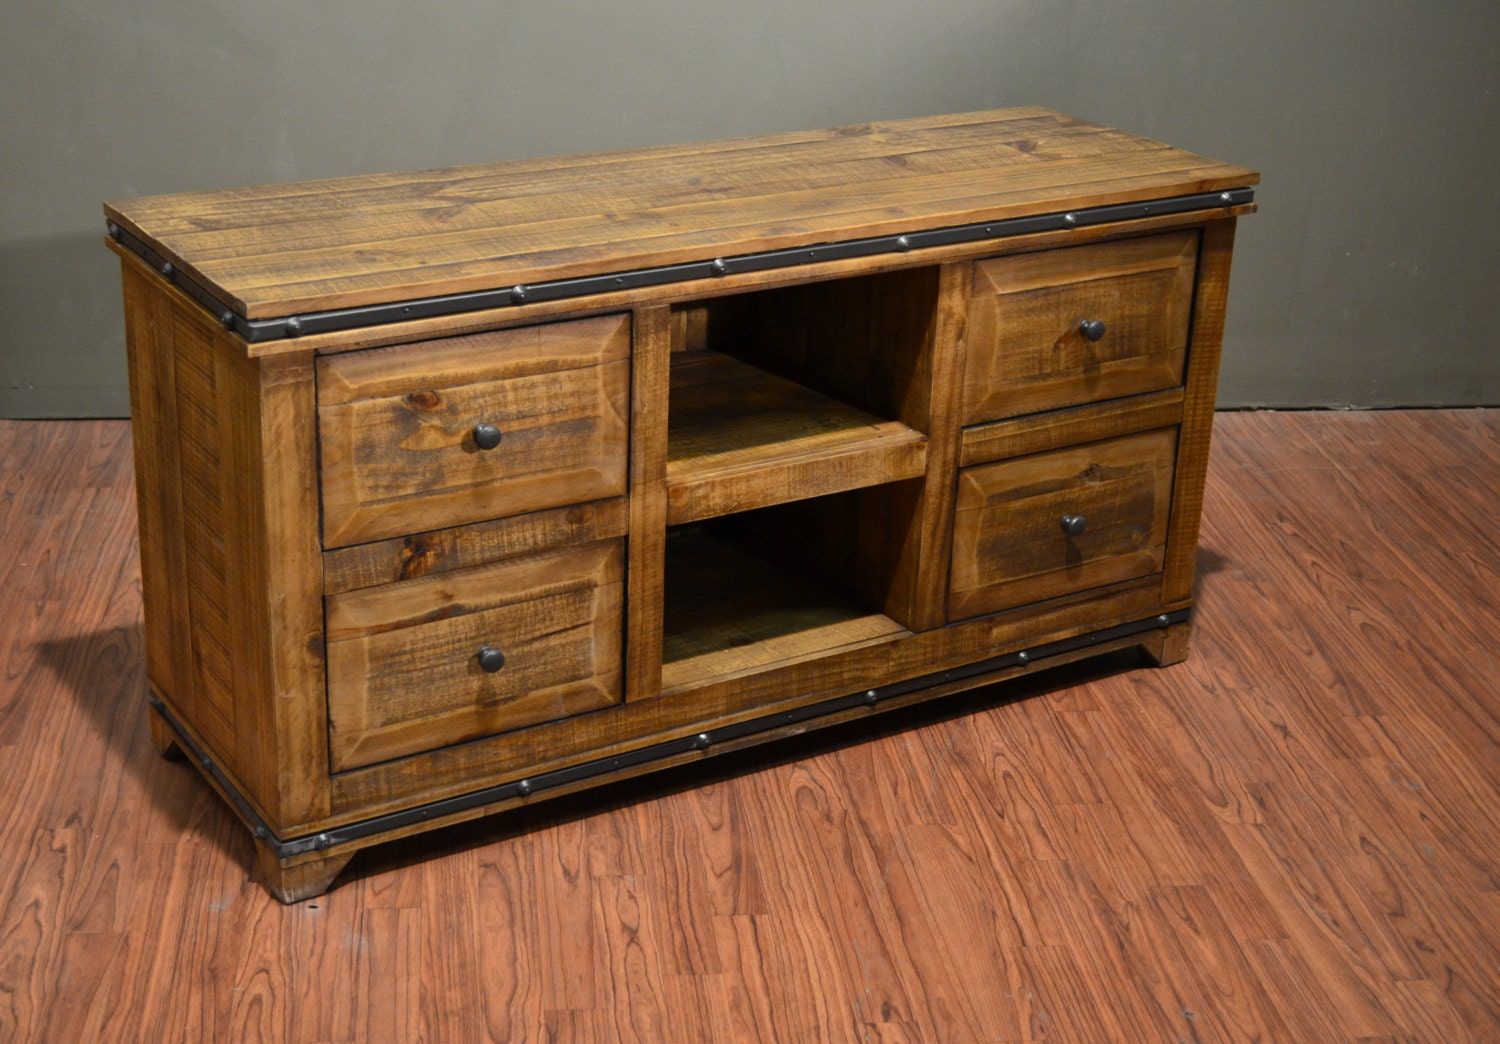 Rustic Style Solid Wood Tv Stand / Media Console With Four Intended For Rustic Tv Cabinets (View 2 of 15)